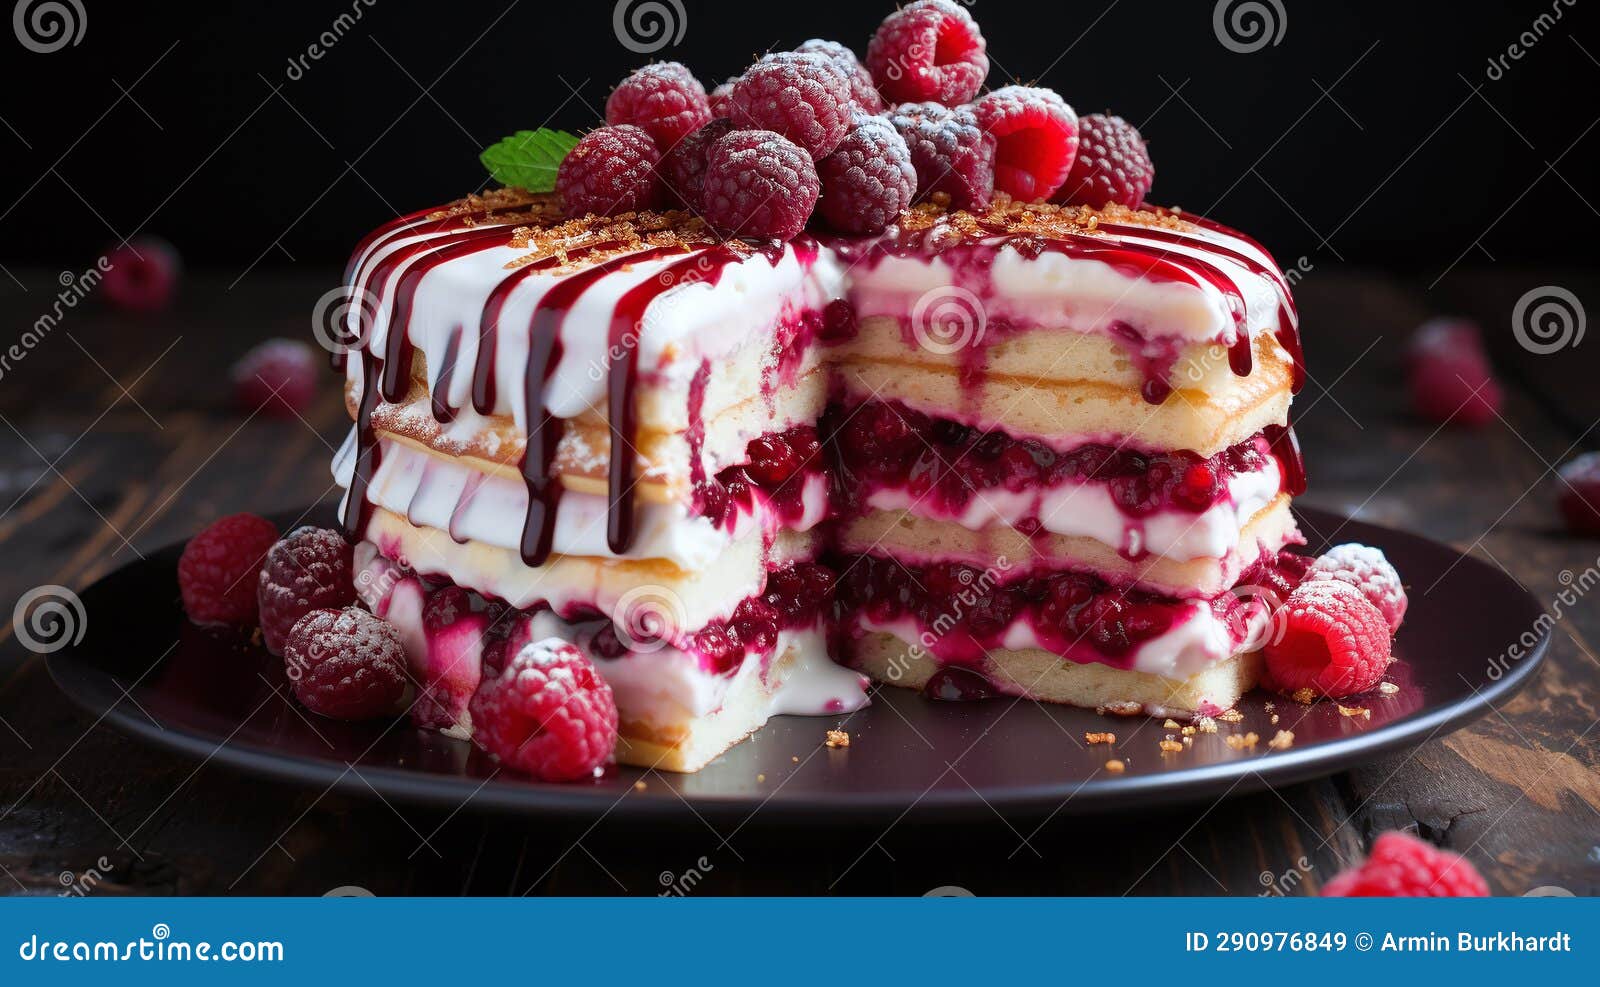 fresh raspberry cake with buscuit dough